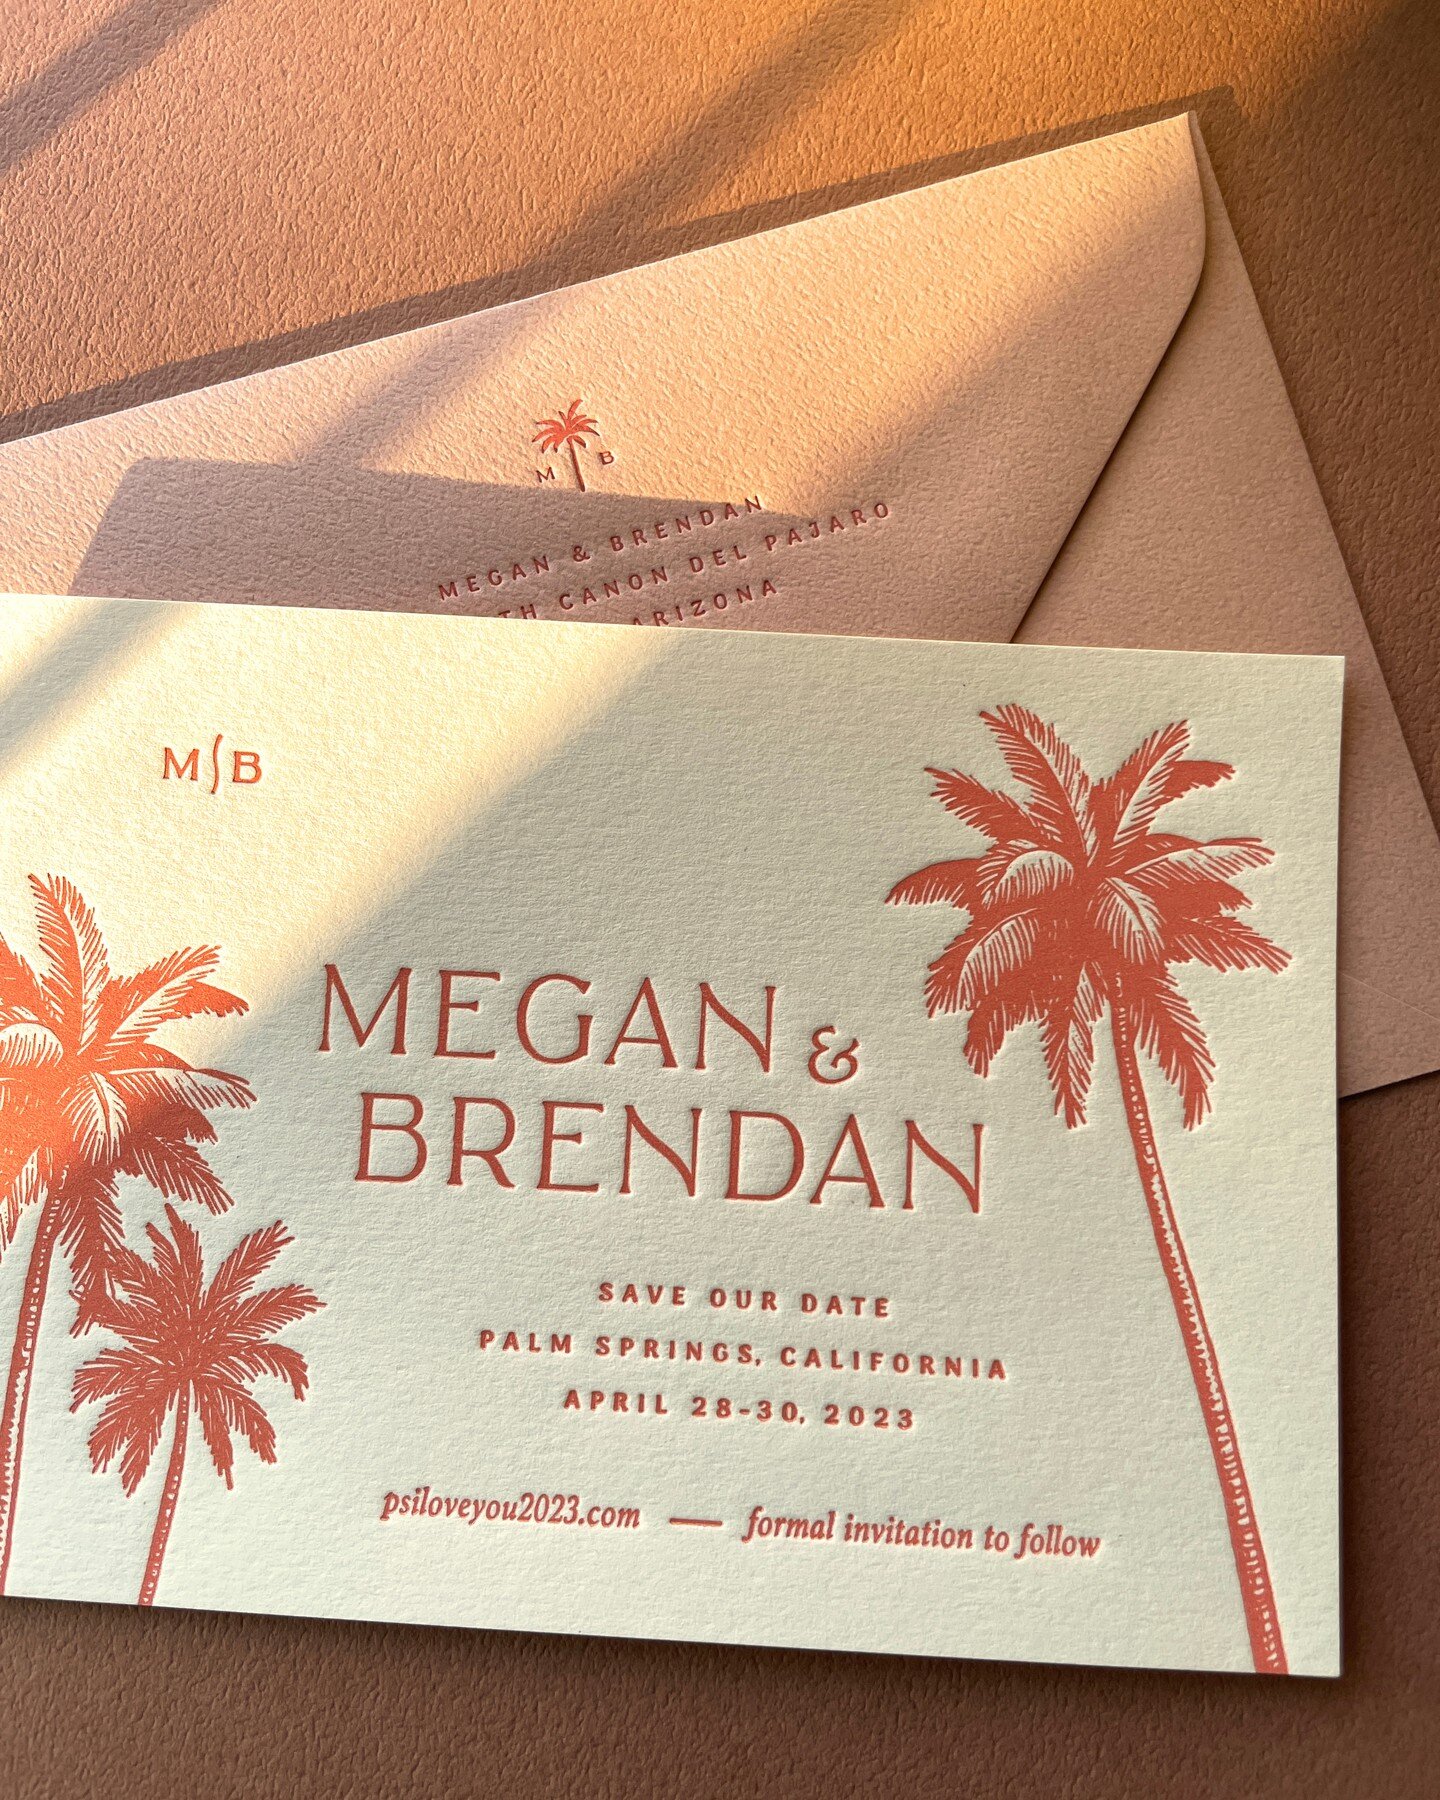 Vintage palm trees and those warm, sunset hues of the desert southwest 🌴🧡 🌴 Letterpress Save the Dates for miss @meh_marshall with @thewalkdowntheaisle Can't wait to see the full wedding suite come together! 

&mdash;
#sunsetcolors #desertsouthwes